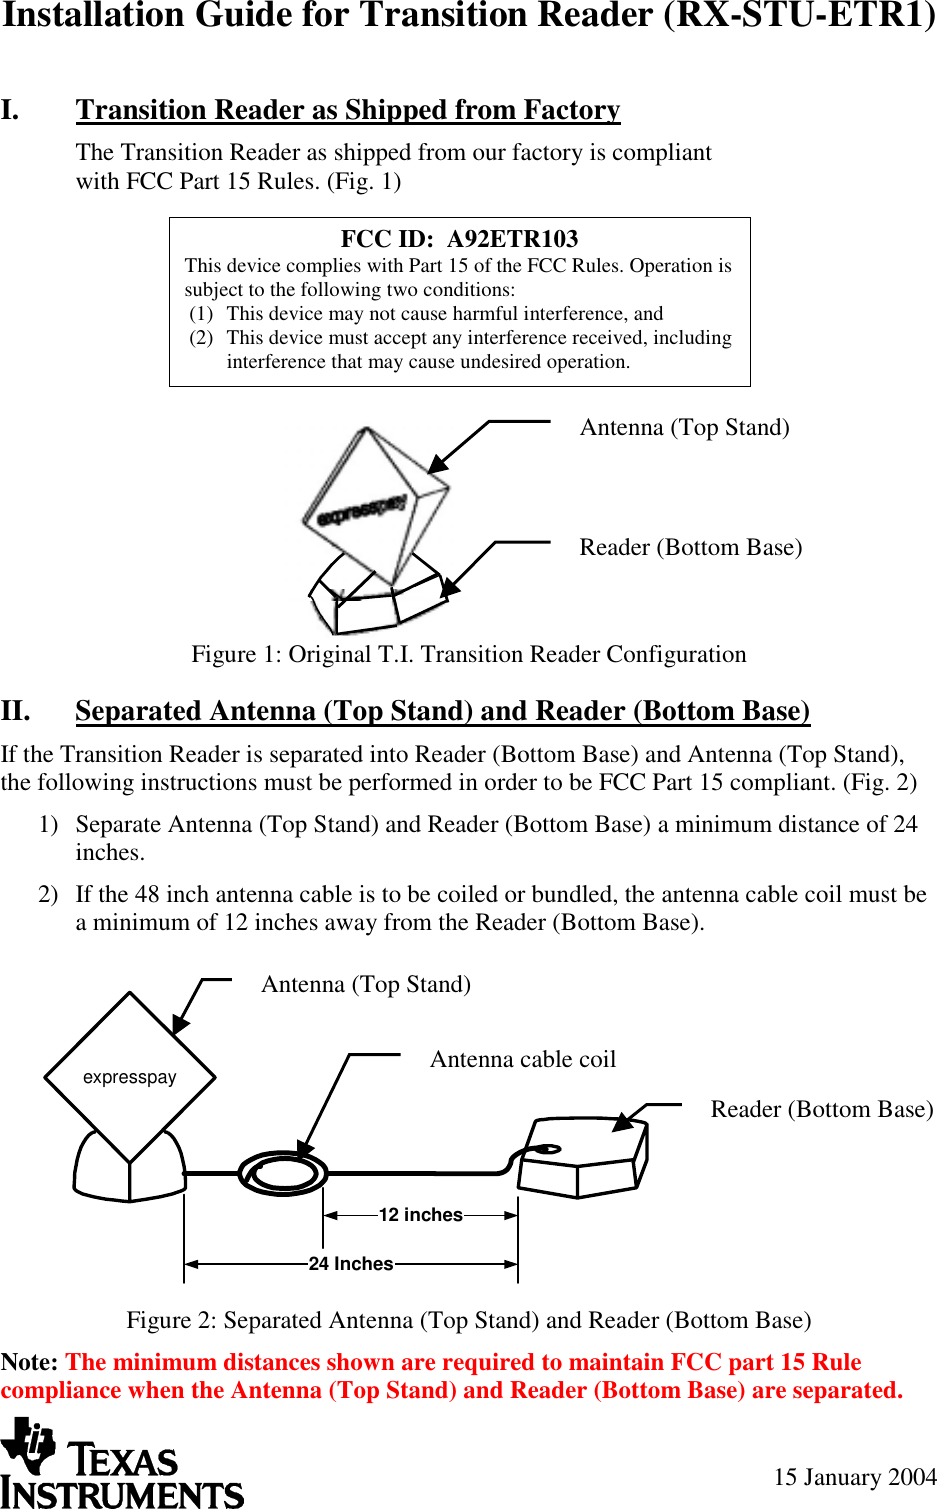 Installation Guide for Transition Reader (RX-STU-ETR1) 15 January 2004 I.  Transition Reader as Shipped from Factory The Transition Reader as shipped from our factory is compliant with FCC Part 15 Rules. (Fig. 1)        Figure 1: Original T.I. Transition Reader Configuration II.  Separated Antenna (Top Stand) and Reader (Bottom Base) If the Transition Reader is separated into Reader (Bottom Base) and Antenna (Top Stand), the following instructions must be performed in order to be FCC Part 15 compliant. (Fig. 2) 1)  Separate Antenna (Top Stand) and Reader (Bottom Base) a minimum distance of 24 inches. 2)  If the 48 inch antenna cable is to be coiled or bundled, the antenna cable coil must be a minimum of 12 inches away from the Reader (Bottom Base).  Figure 2: Separated Antenna (Top Stand) and Reader (Bottom Base) Note: The minimum distances shown are required to maintain FCC part 15 Rule compliance when the Antenna (Top Stand) and Reader (Bottom Base) are separated. expresspay12 inches24 Inches Antenna (Top Stand) Reader (Bottom Base) Antenna cable coilAntenna (Top Stand) Reader (Bottom Base) FCC ID:  A92ETR103 This device complies with Part 15 of the FCC Rules. Operation is subject to the following two conditions: (1)  This device may not cause harmful interference, and (2)  This device must accept any interference received, including interference that may cause undesired operation. 